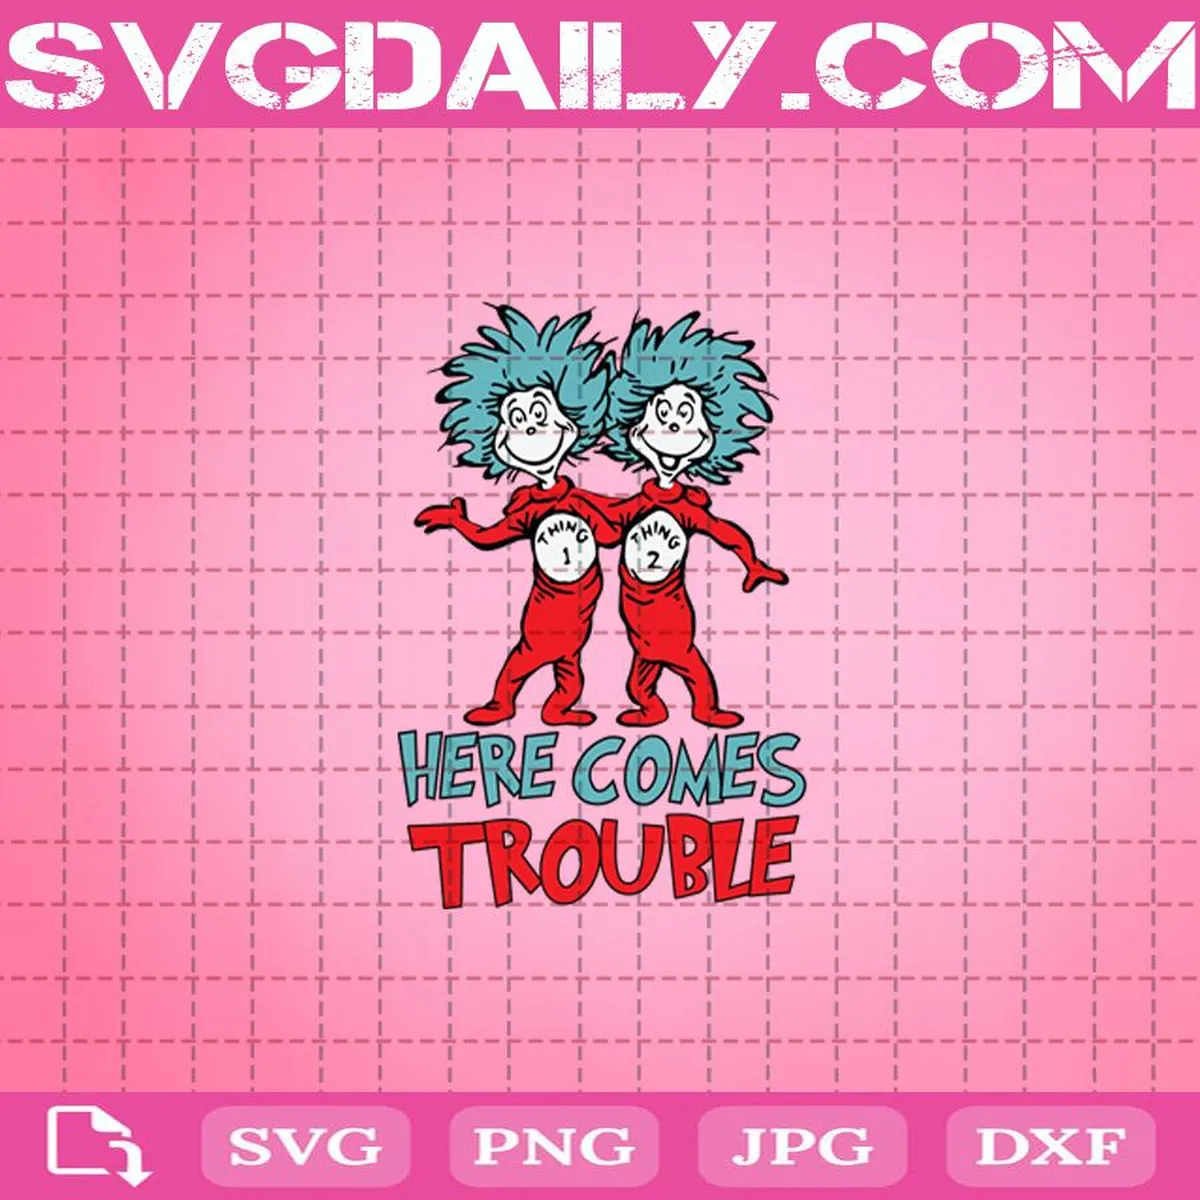 Here Comes Trouble Svg, Dr Seuss Svg, Dr Seuss 2021 Svg, Thing Svg, Cat In Hat Svg, Catinthehat Svg, Thelorax Svg